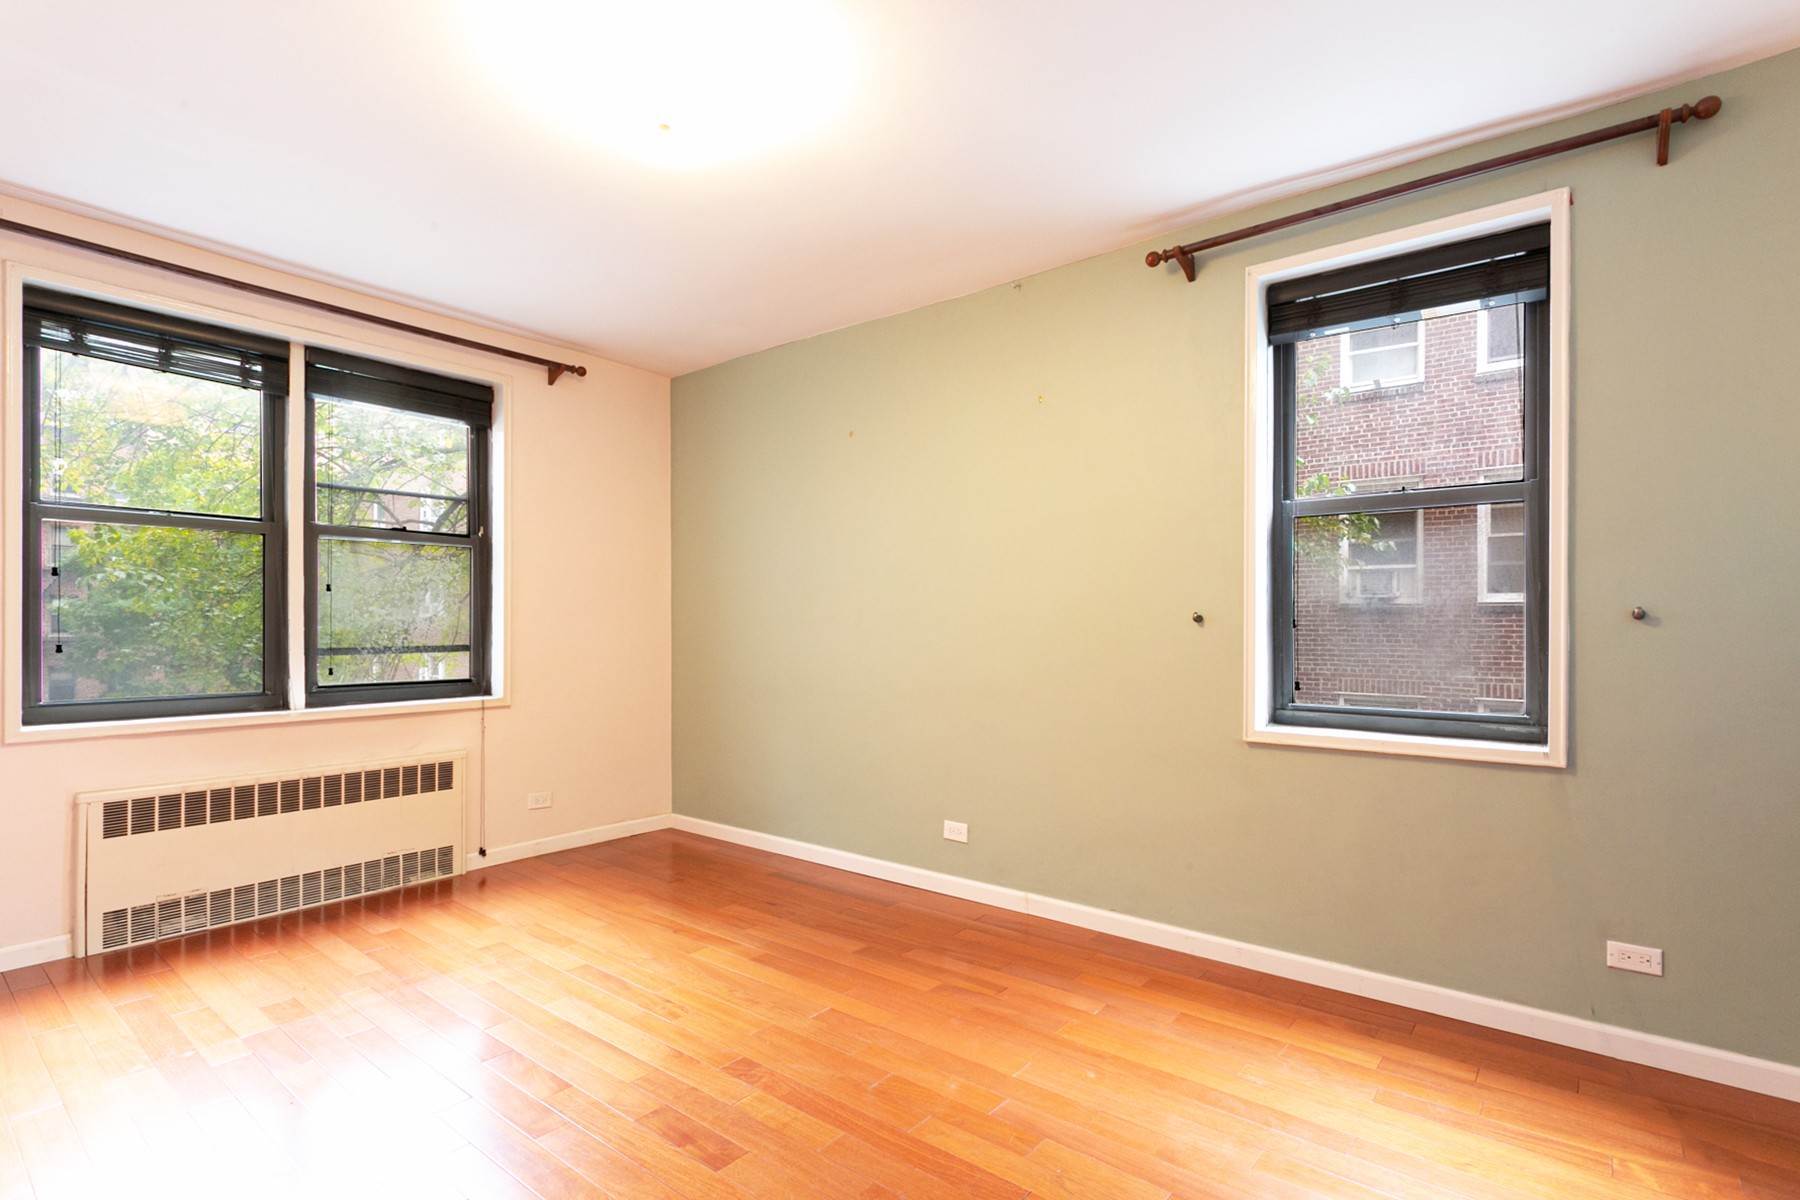 7. Co-op Properties for Sale at 'SPACIOUS TWO BEDROOM COOP IN PRESTIGIOUS FOREST HILLS BUILDING' 69-60 108th Street, #316 Forest Hills, New York 11375 United States